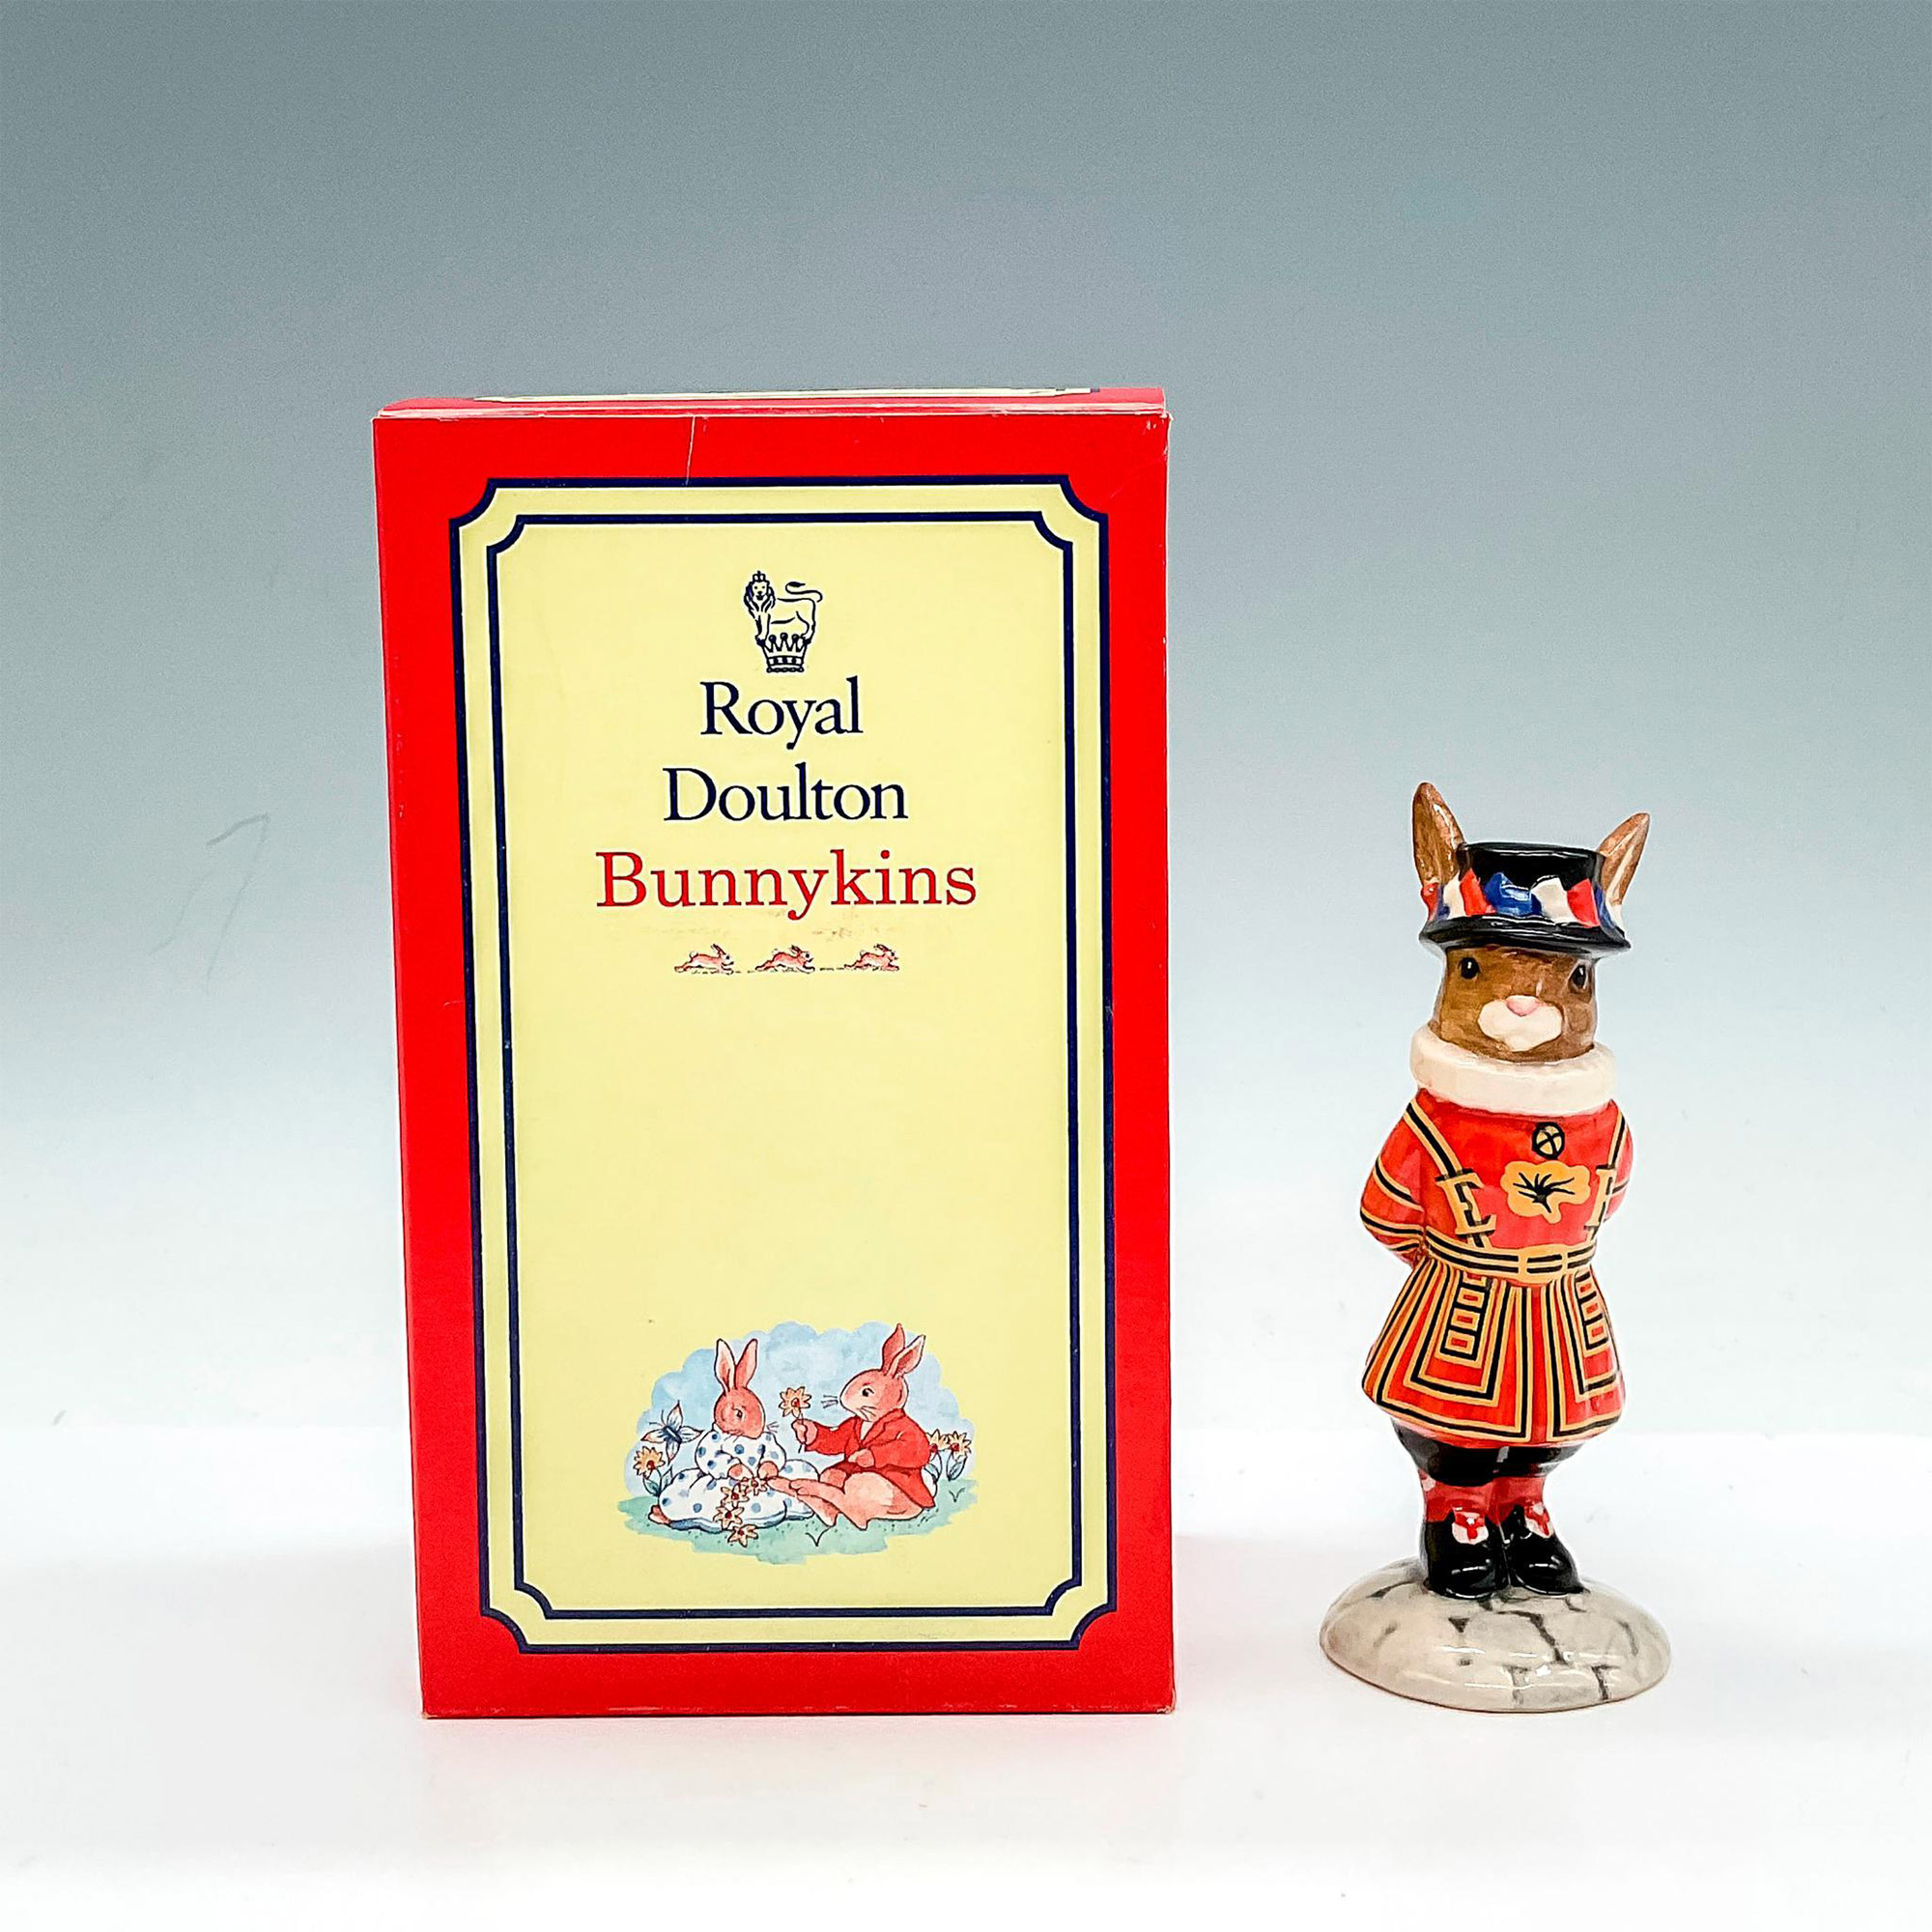 Beefeater DB163 - Royal Doulton Bunnykins - Image 2 of 4